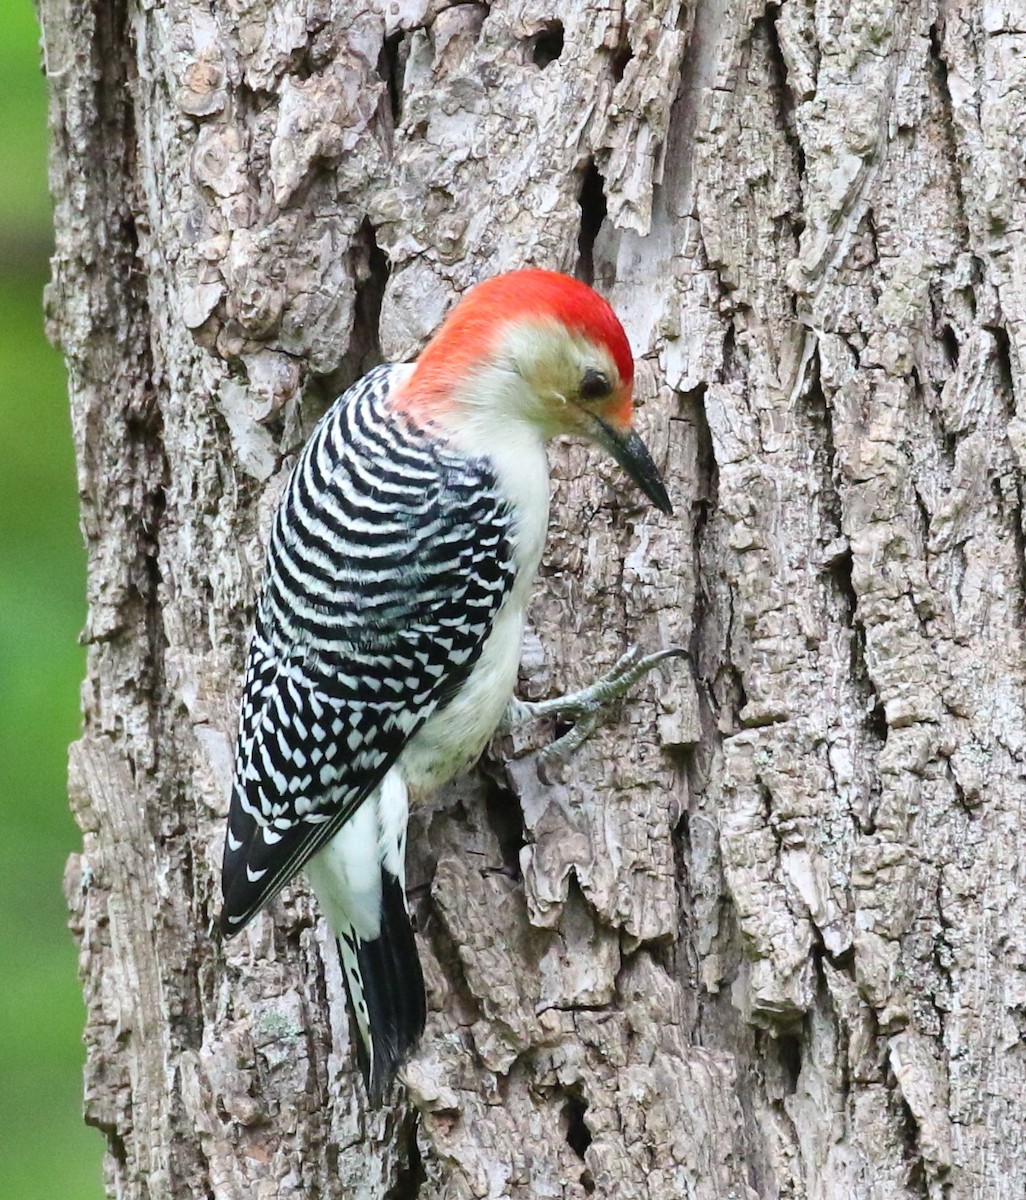 Red-bellied Woodpecker - maggie peretto